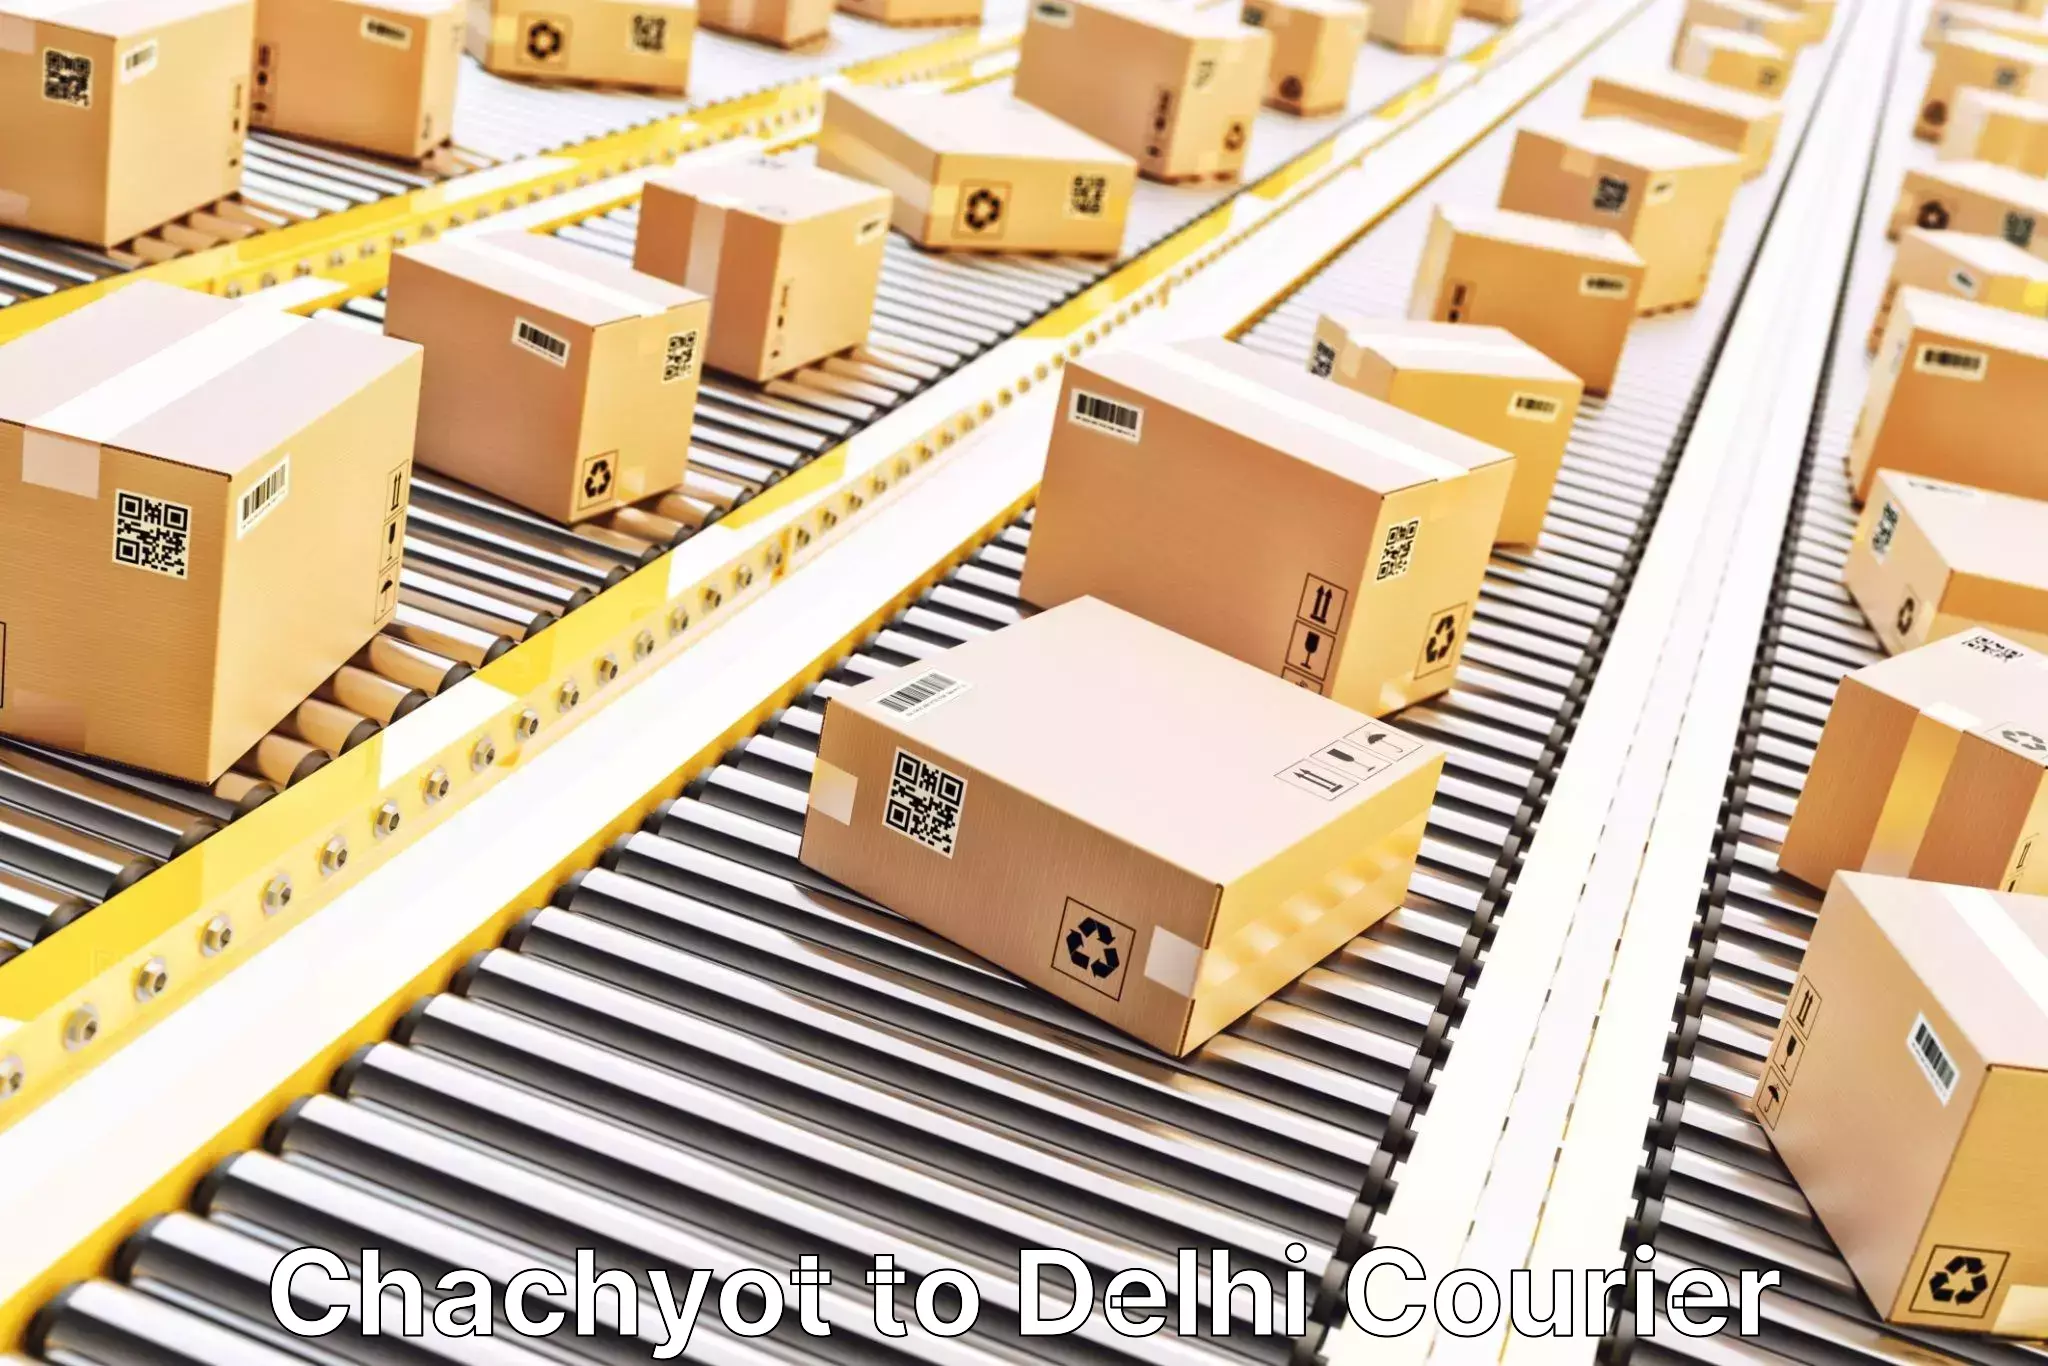 Fragile item shipping Chachyot to University of Delhi